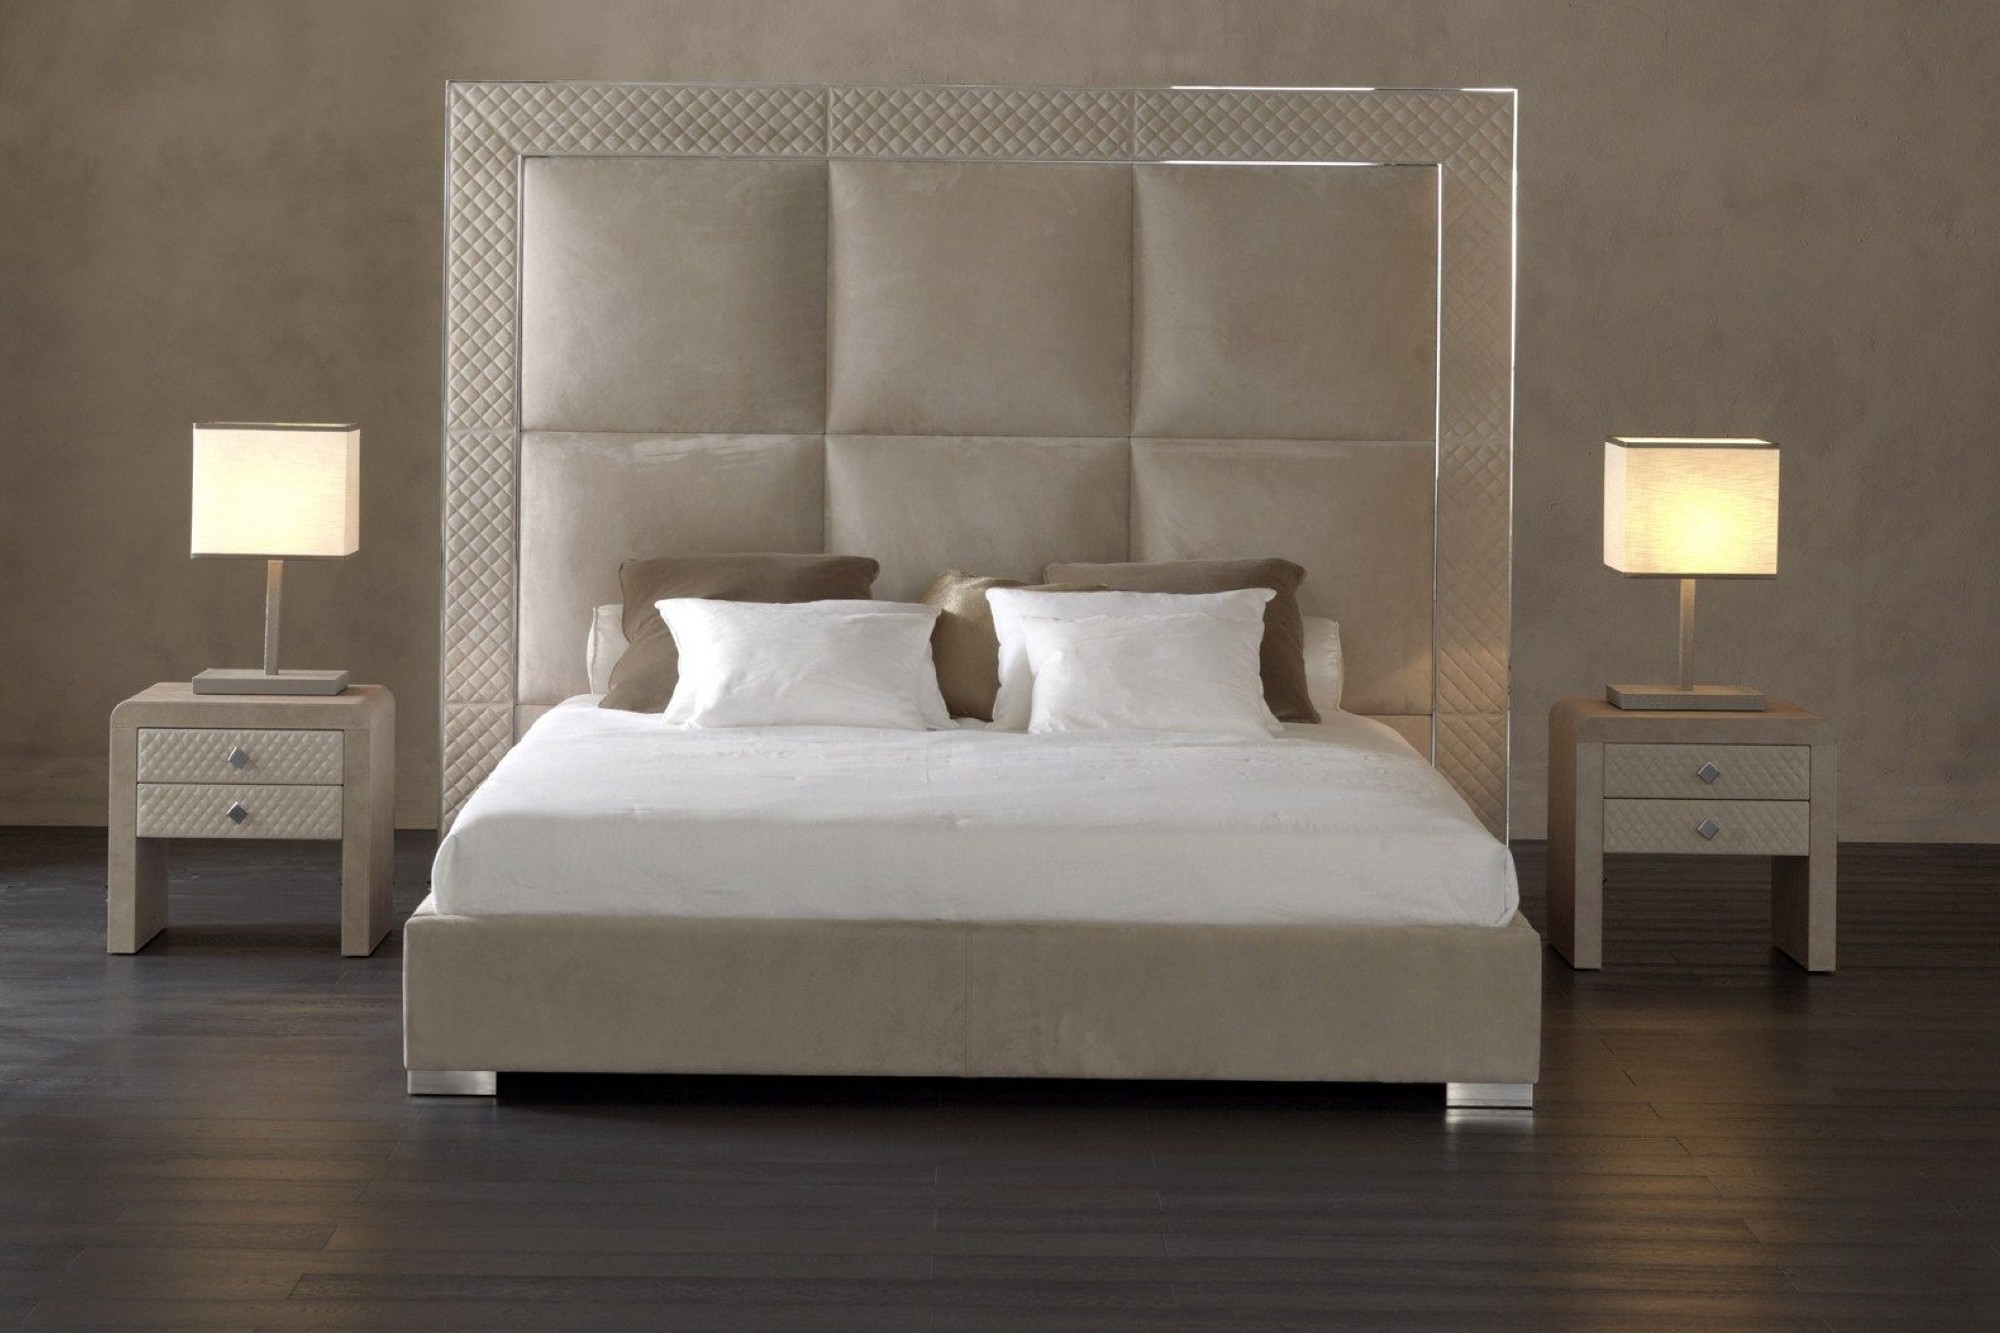 Etreluxe introduces exquisite bed collection